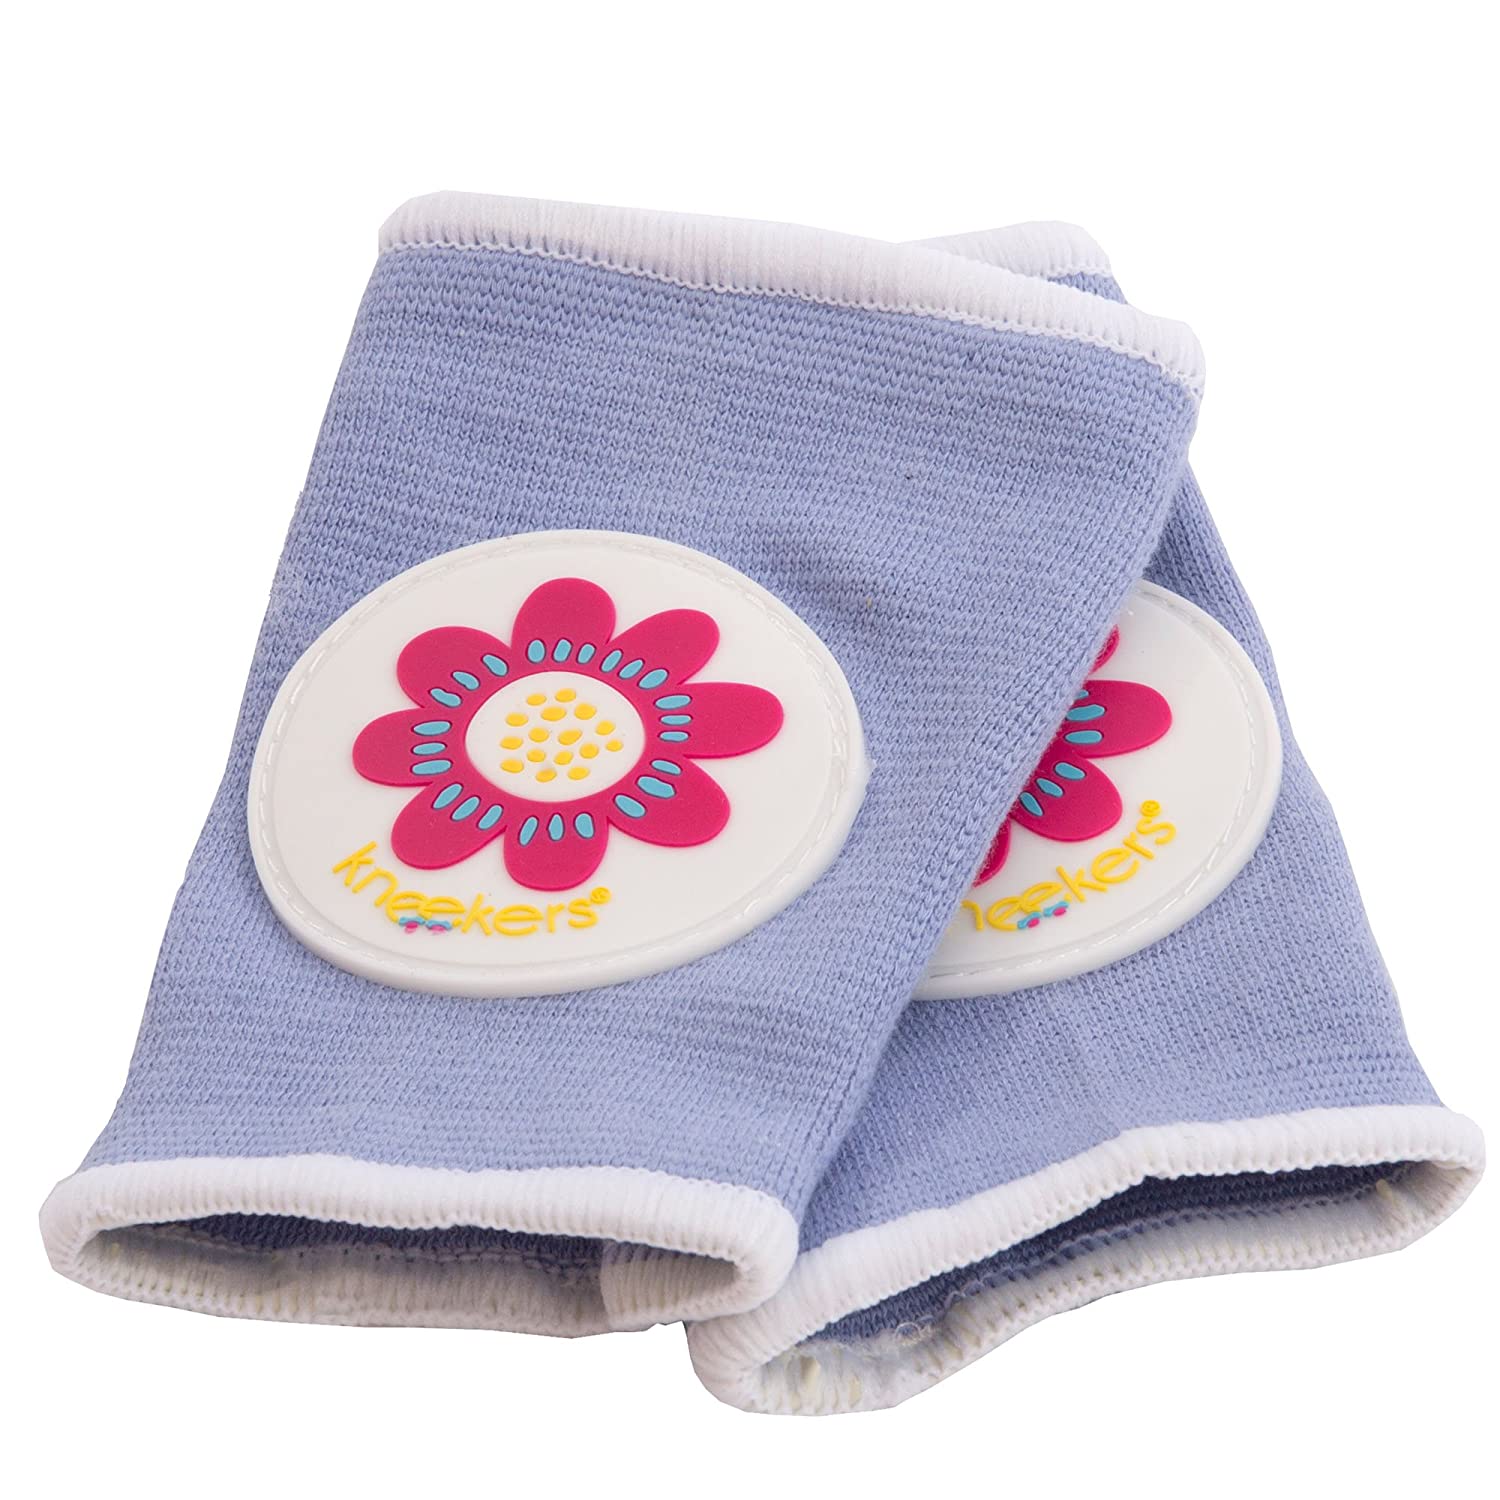 Top 9 Best Baby Knee Pads for Crawling Reviews in 2022 3